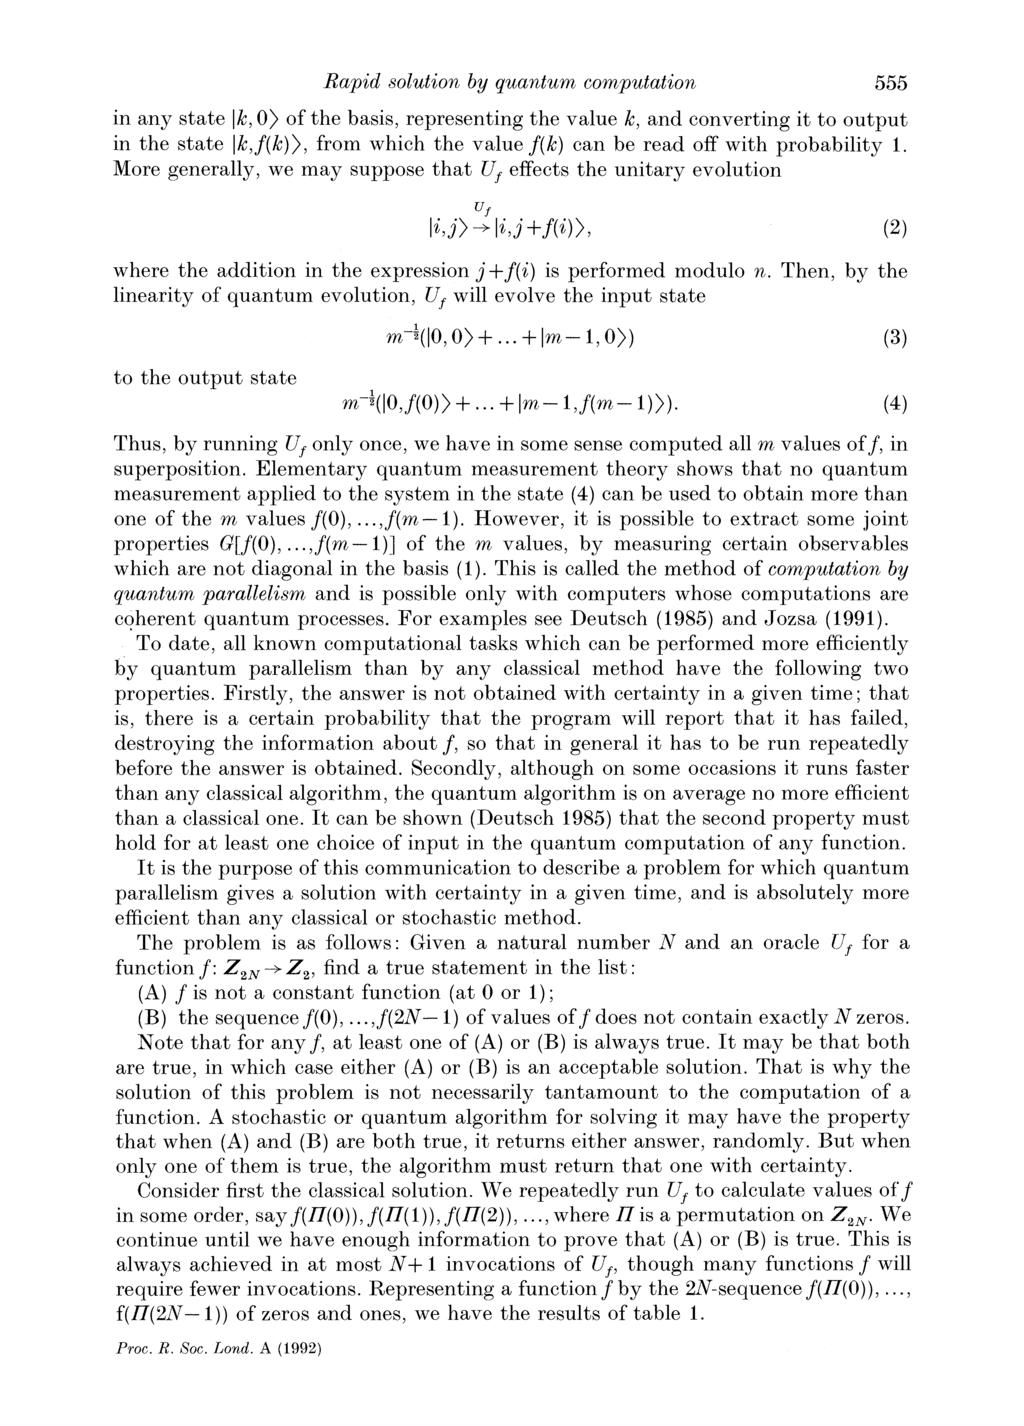 Rapid solution by quantum computation 555 in any state Ik, 0> of the basis, representing the value k, and converting it to output in the state Ik,f(k)), from which the value f(k) can be read off with